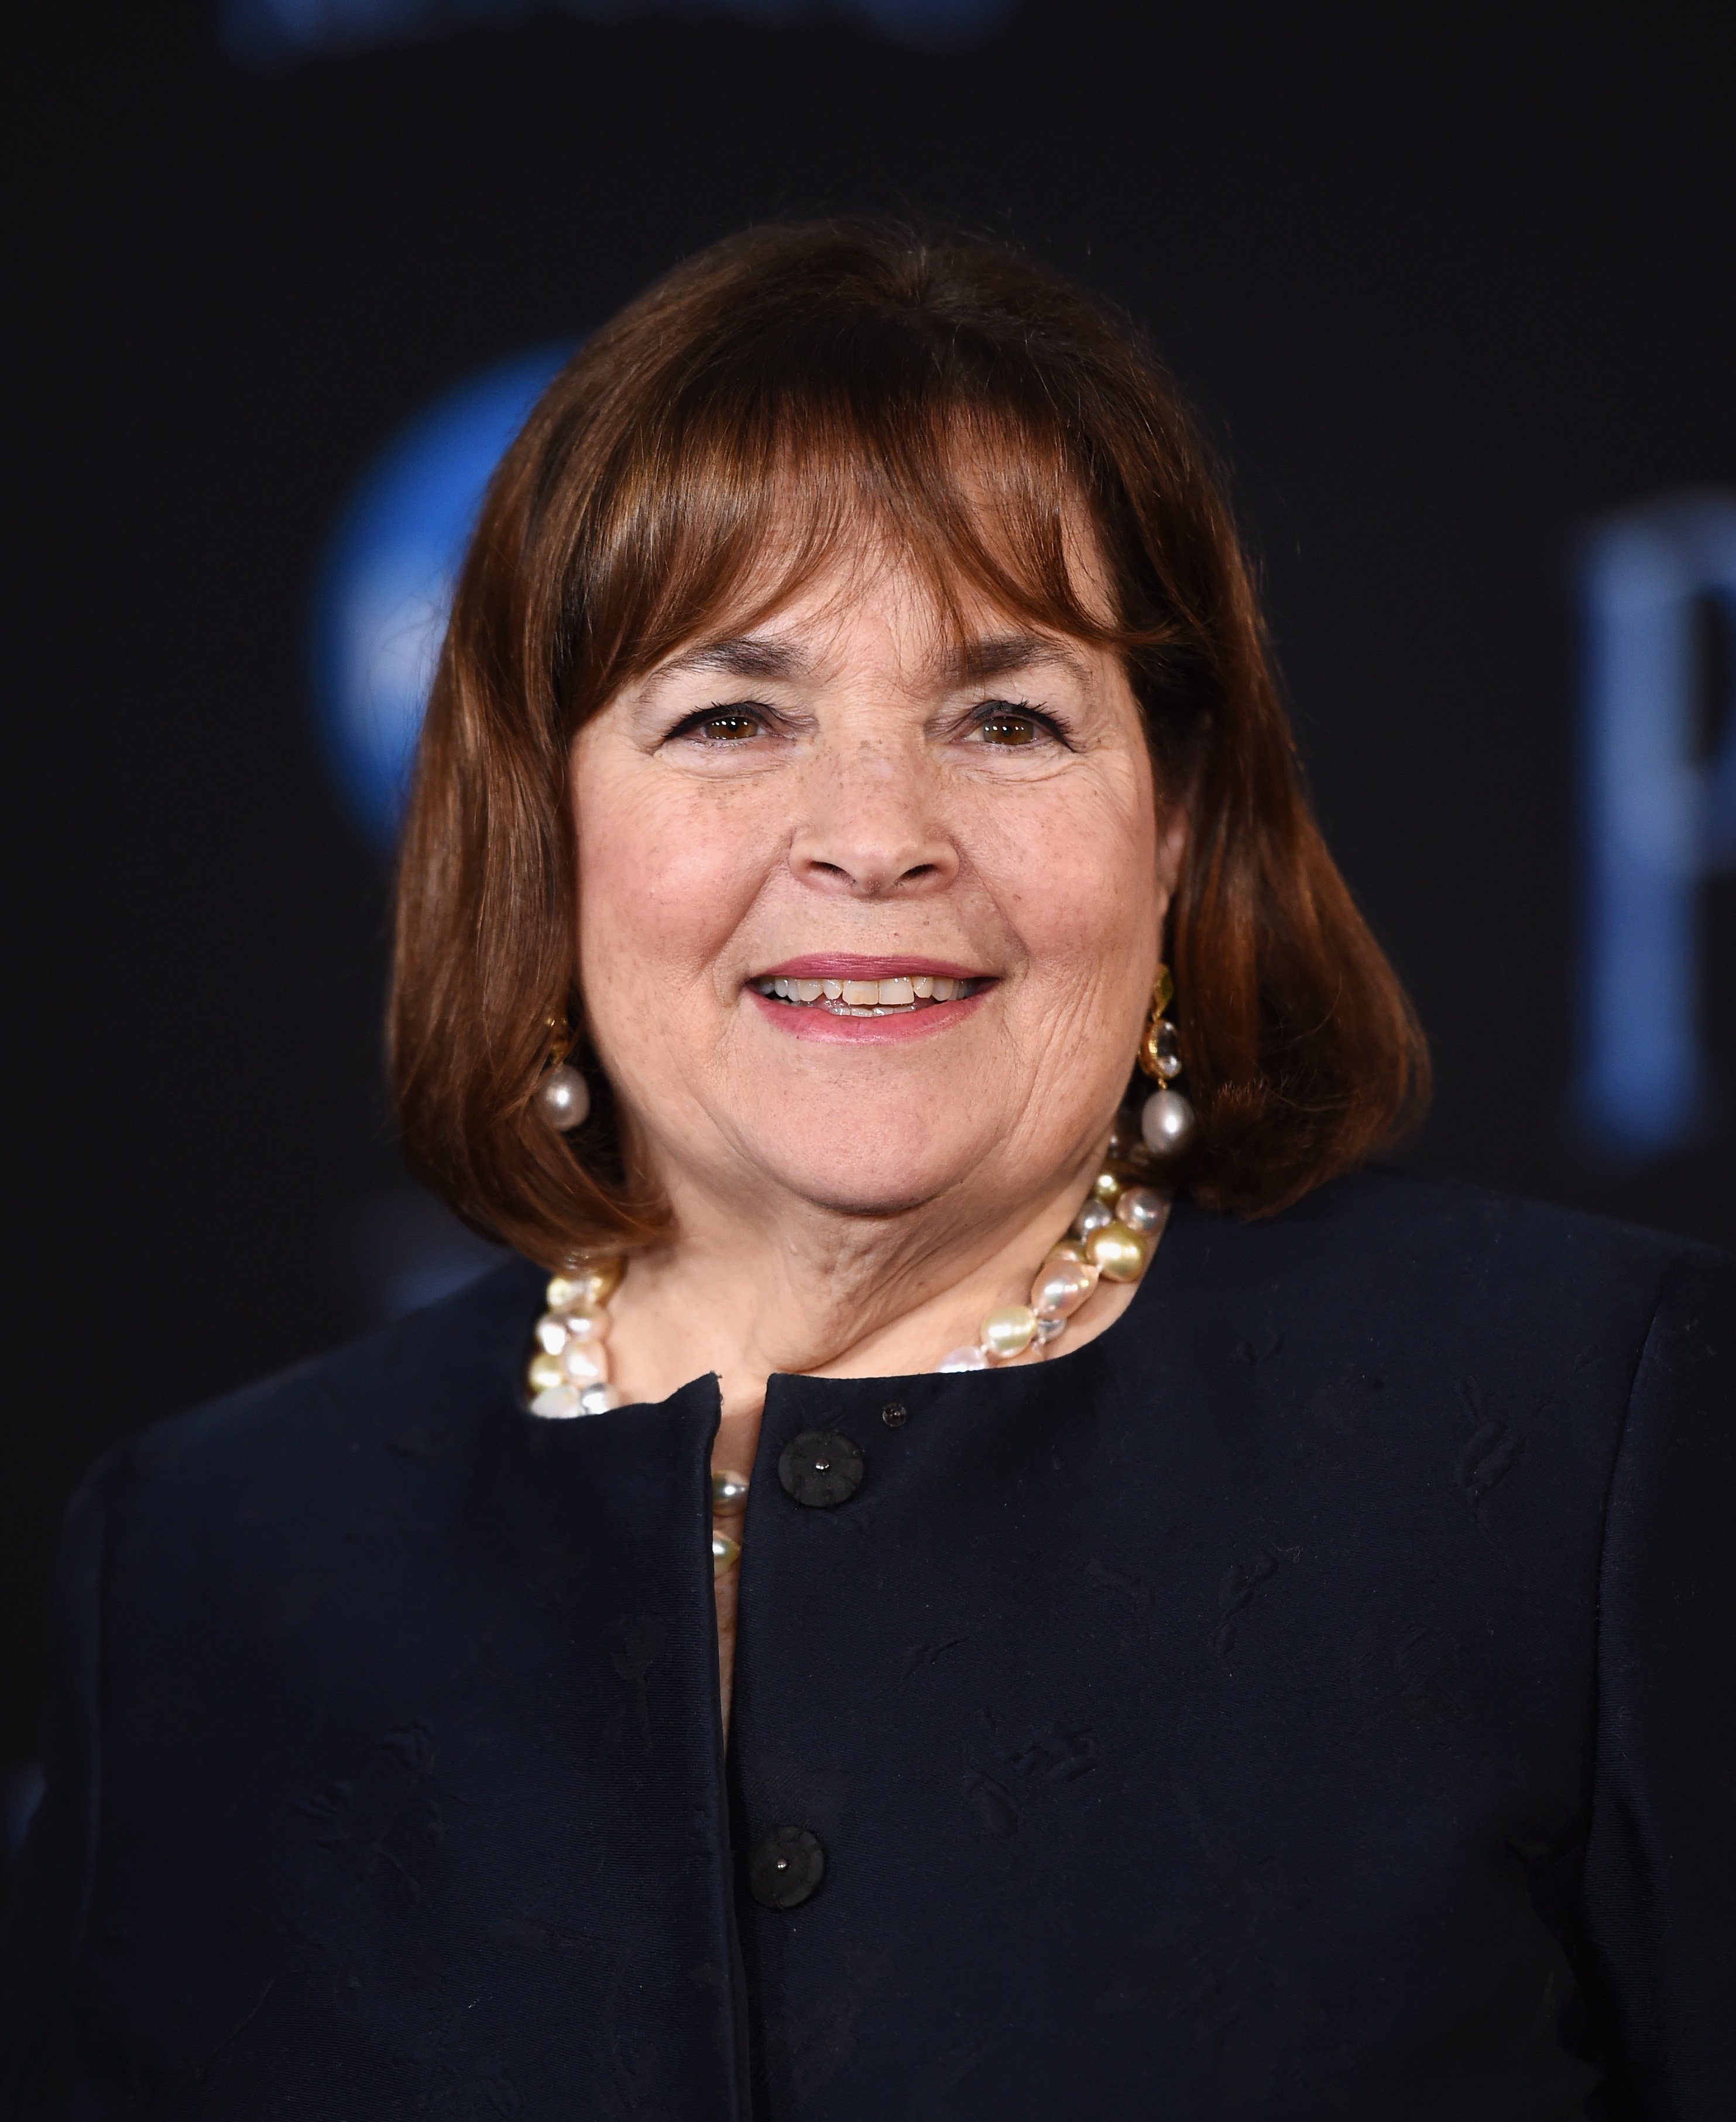 Ina Garten arrives at the premiere of Disney's 